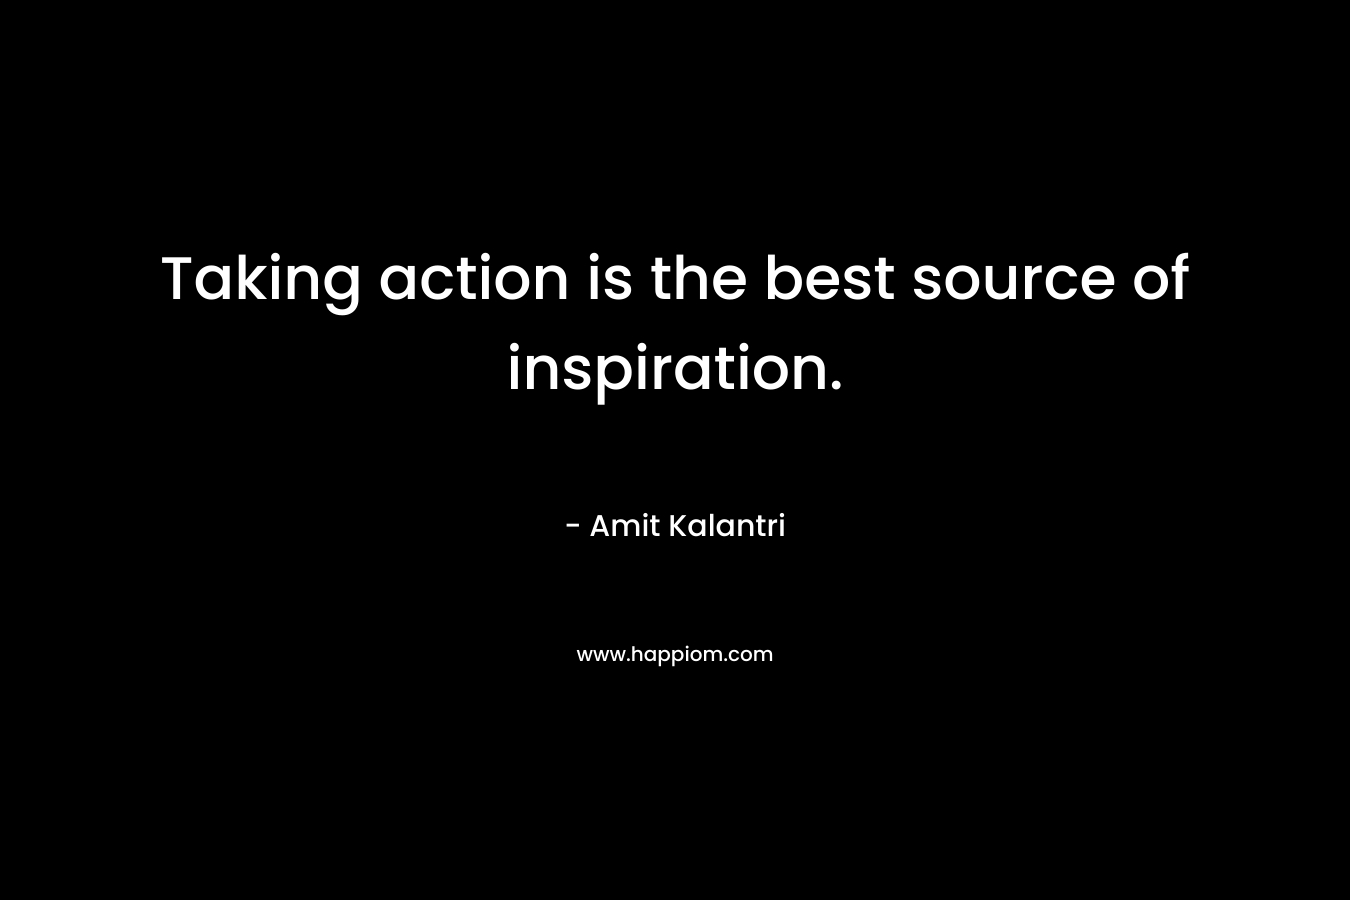 Taking action is the best source of inspiration.